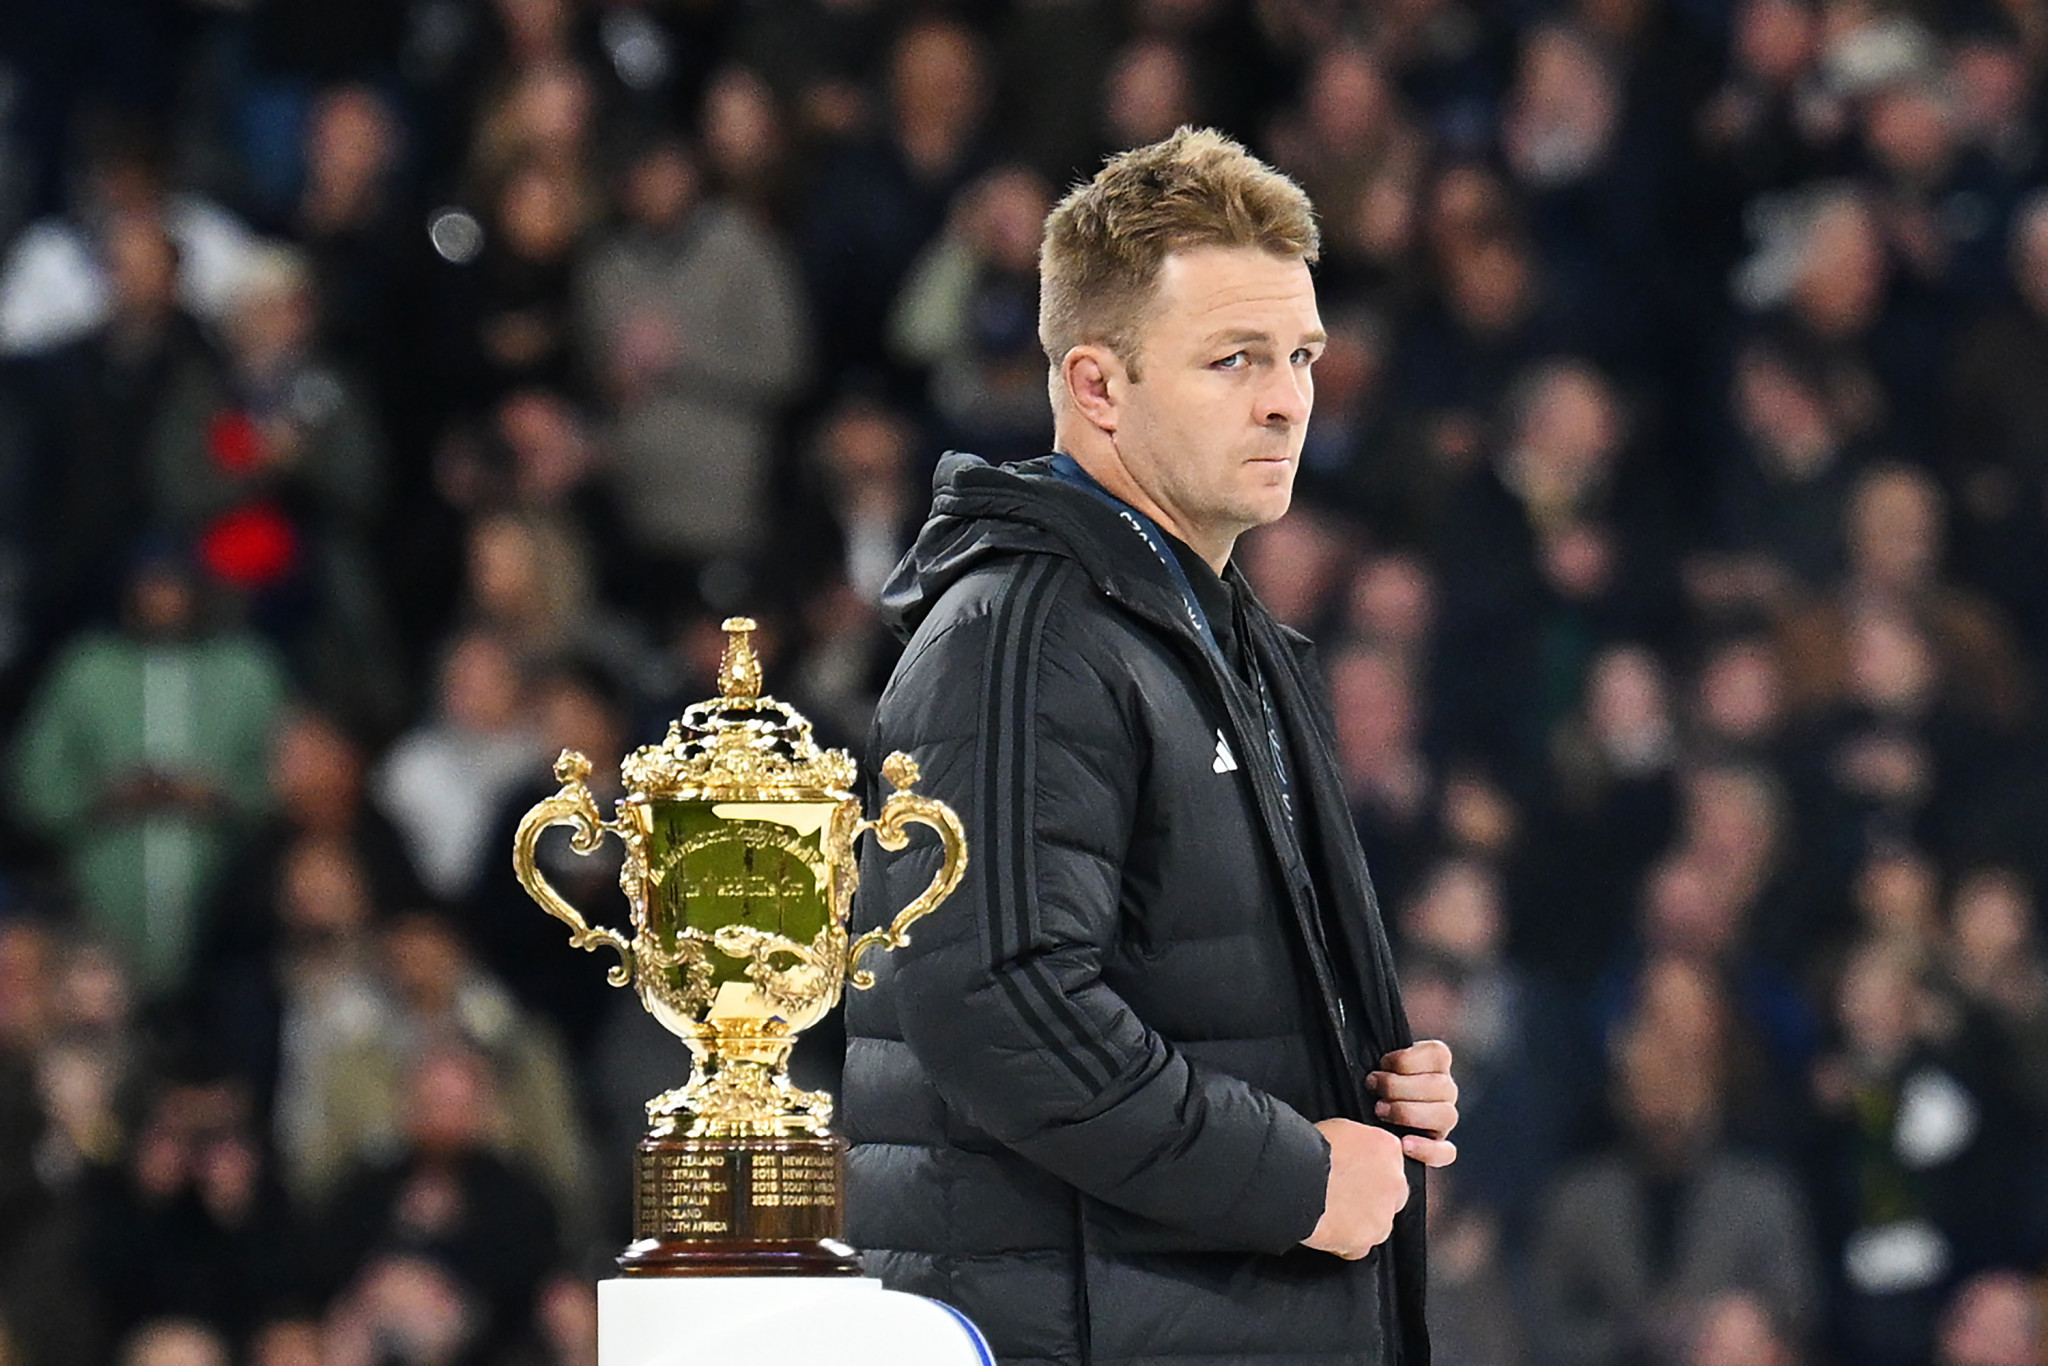 New Zealand captain Sam Cane became the first player in history to be shown a red card in the Rugby World Cup final ©Getty Images